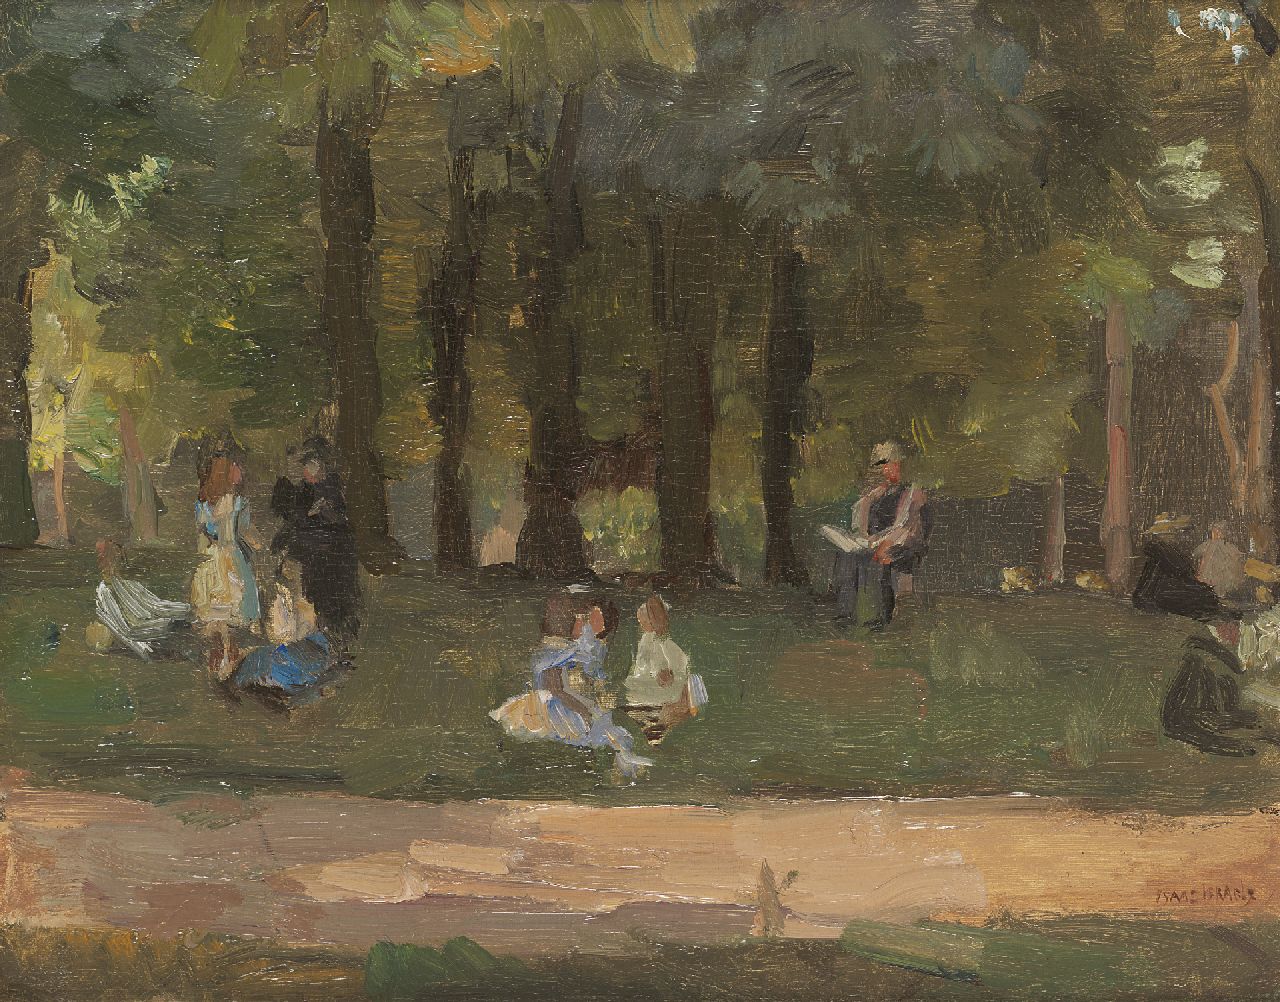 Israels I.L.  | 'Isaac' Lazarus Israels, In the park, oil on canvas 32.2 x 40.6 cm, signed l.r.